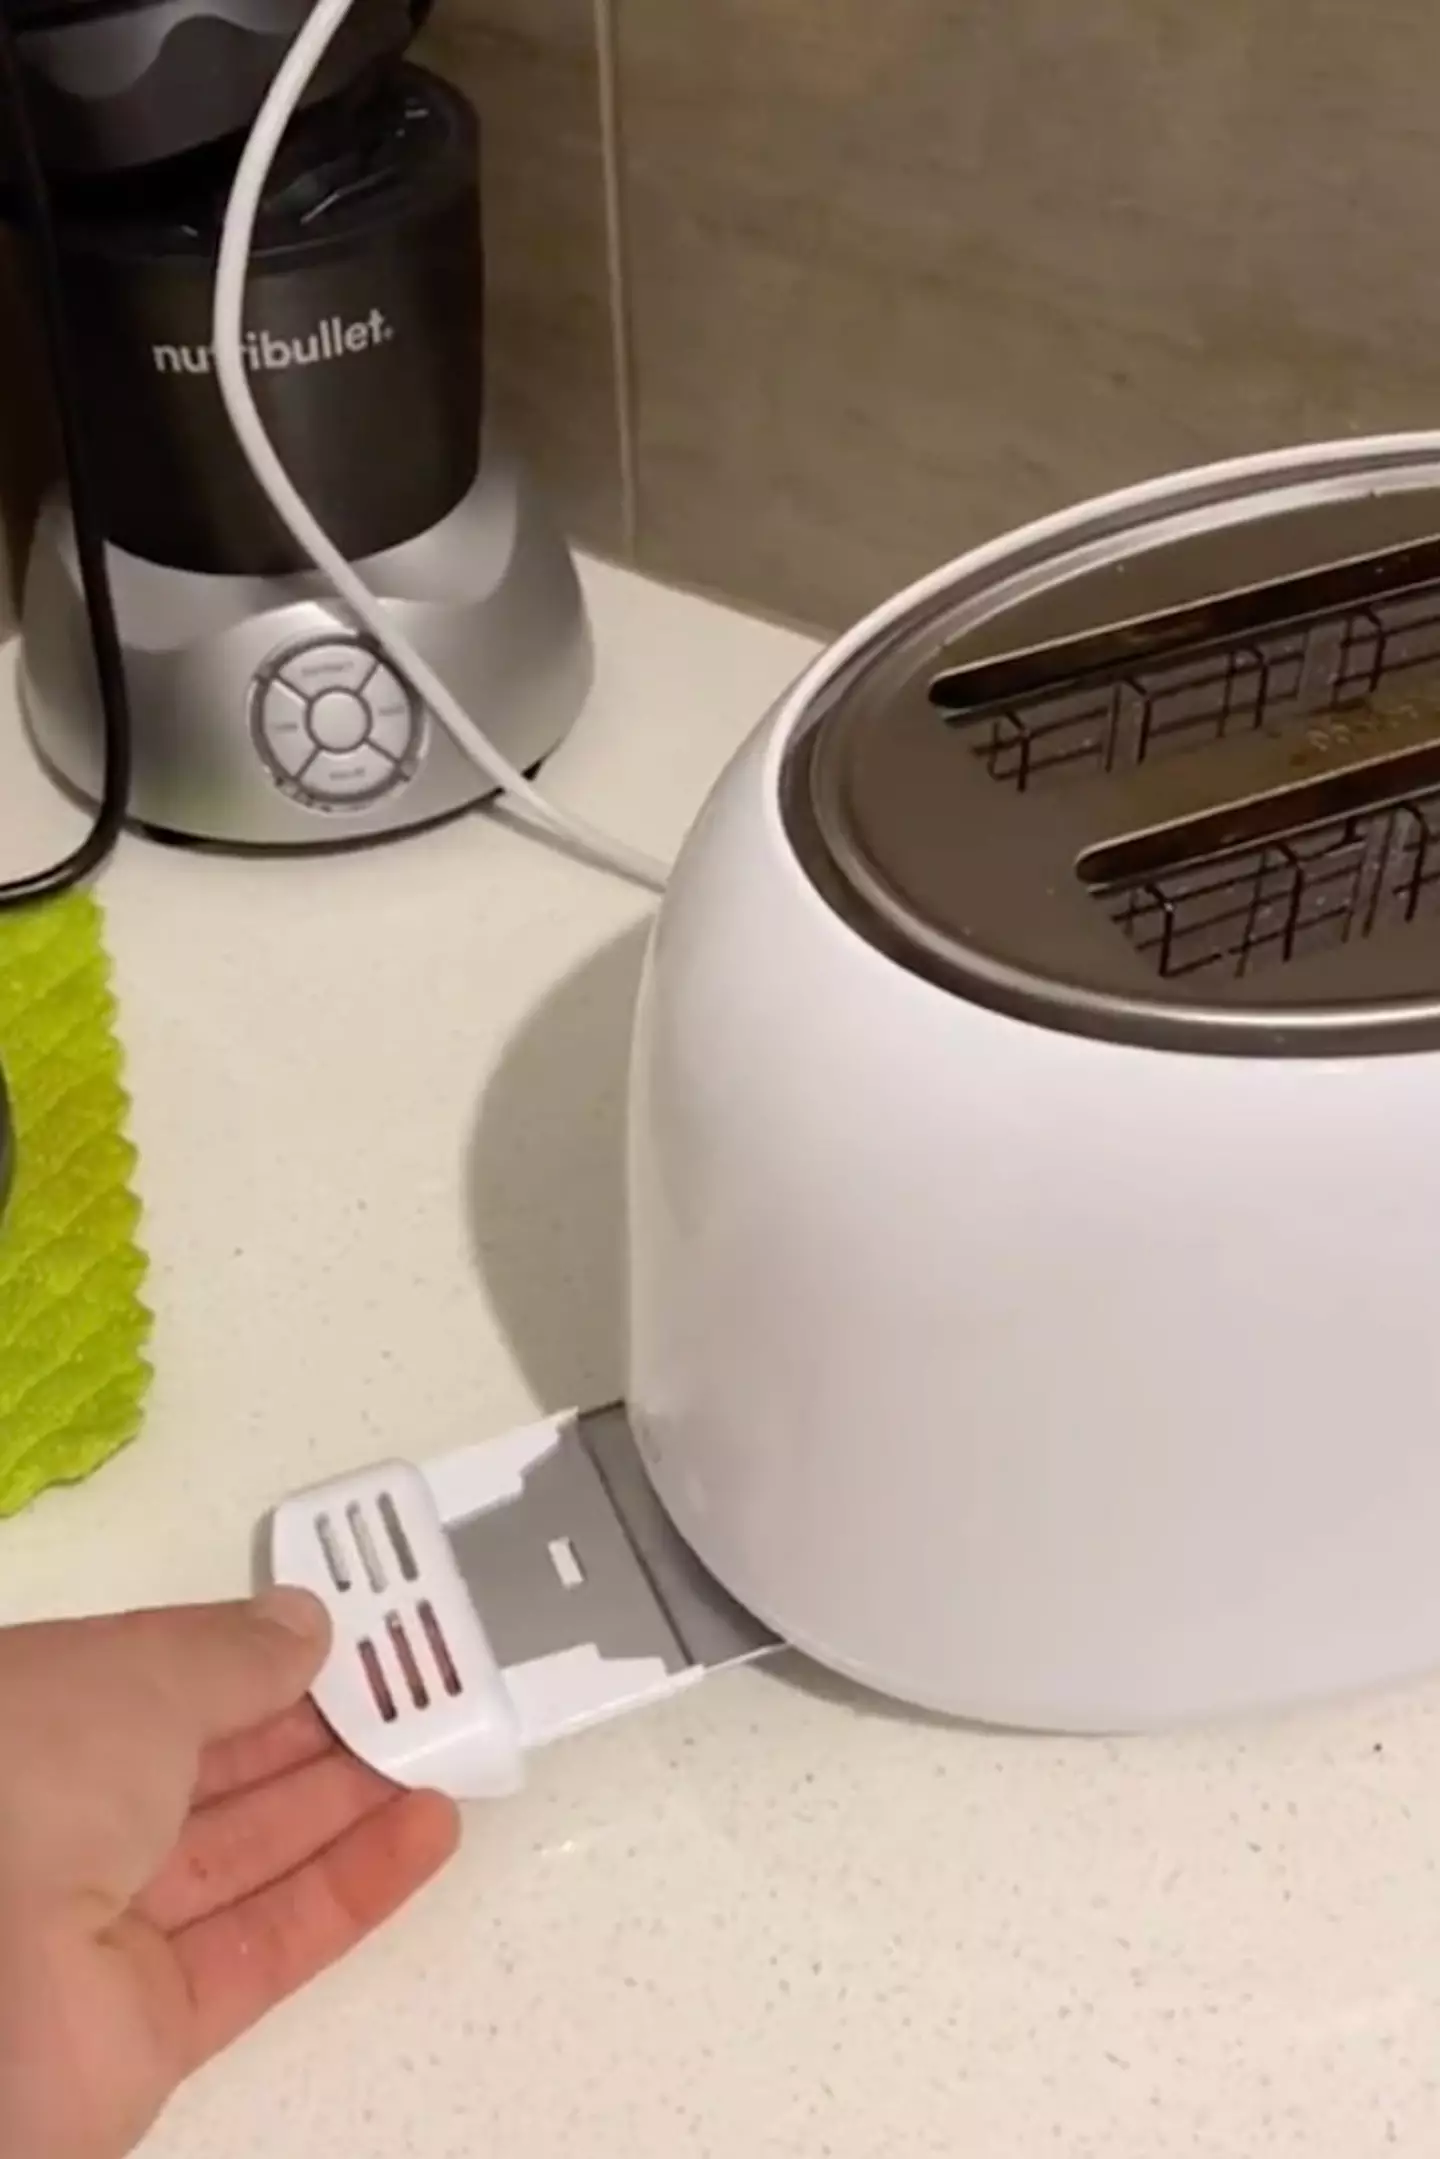 The toaster tray catches crumbs and makes it easier to clean the appliance.